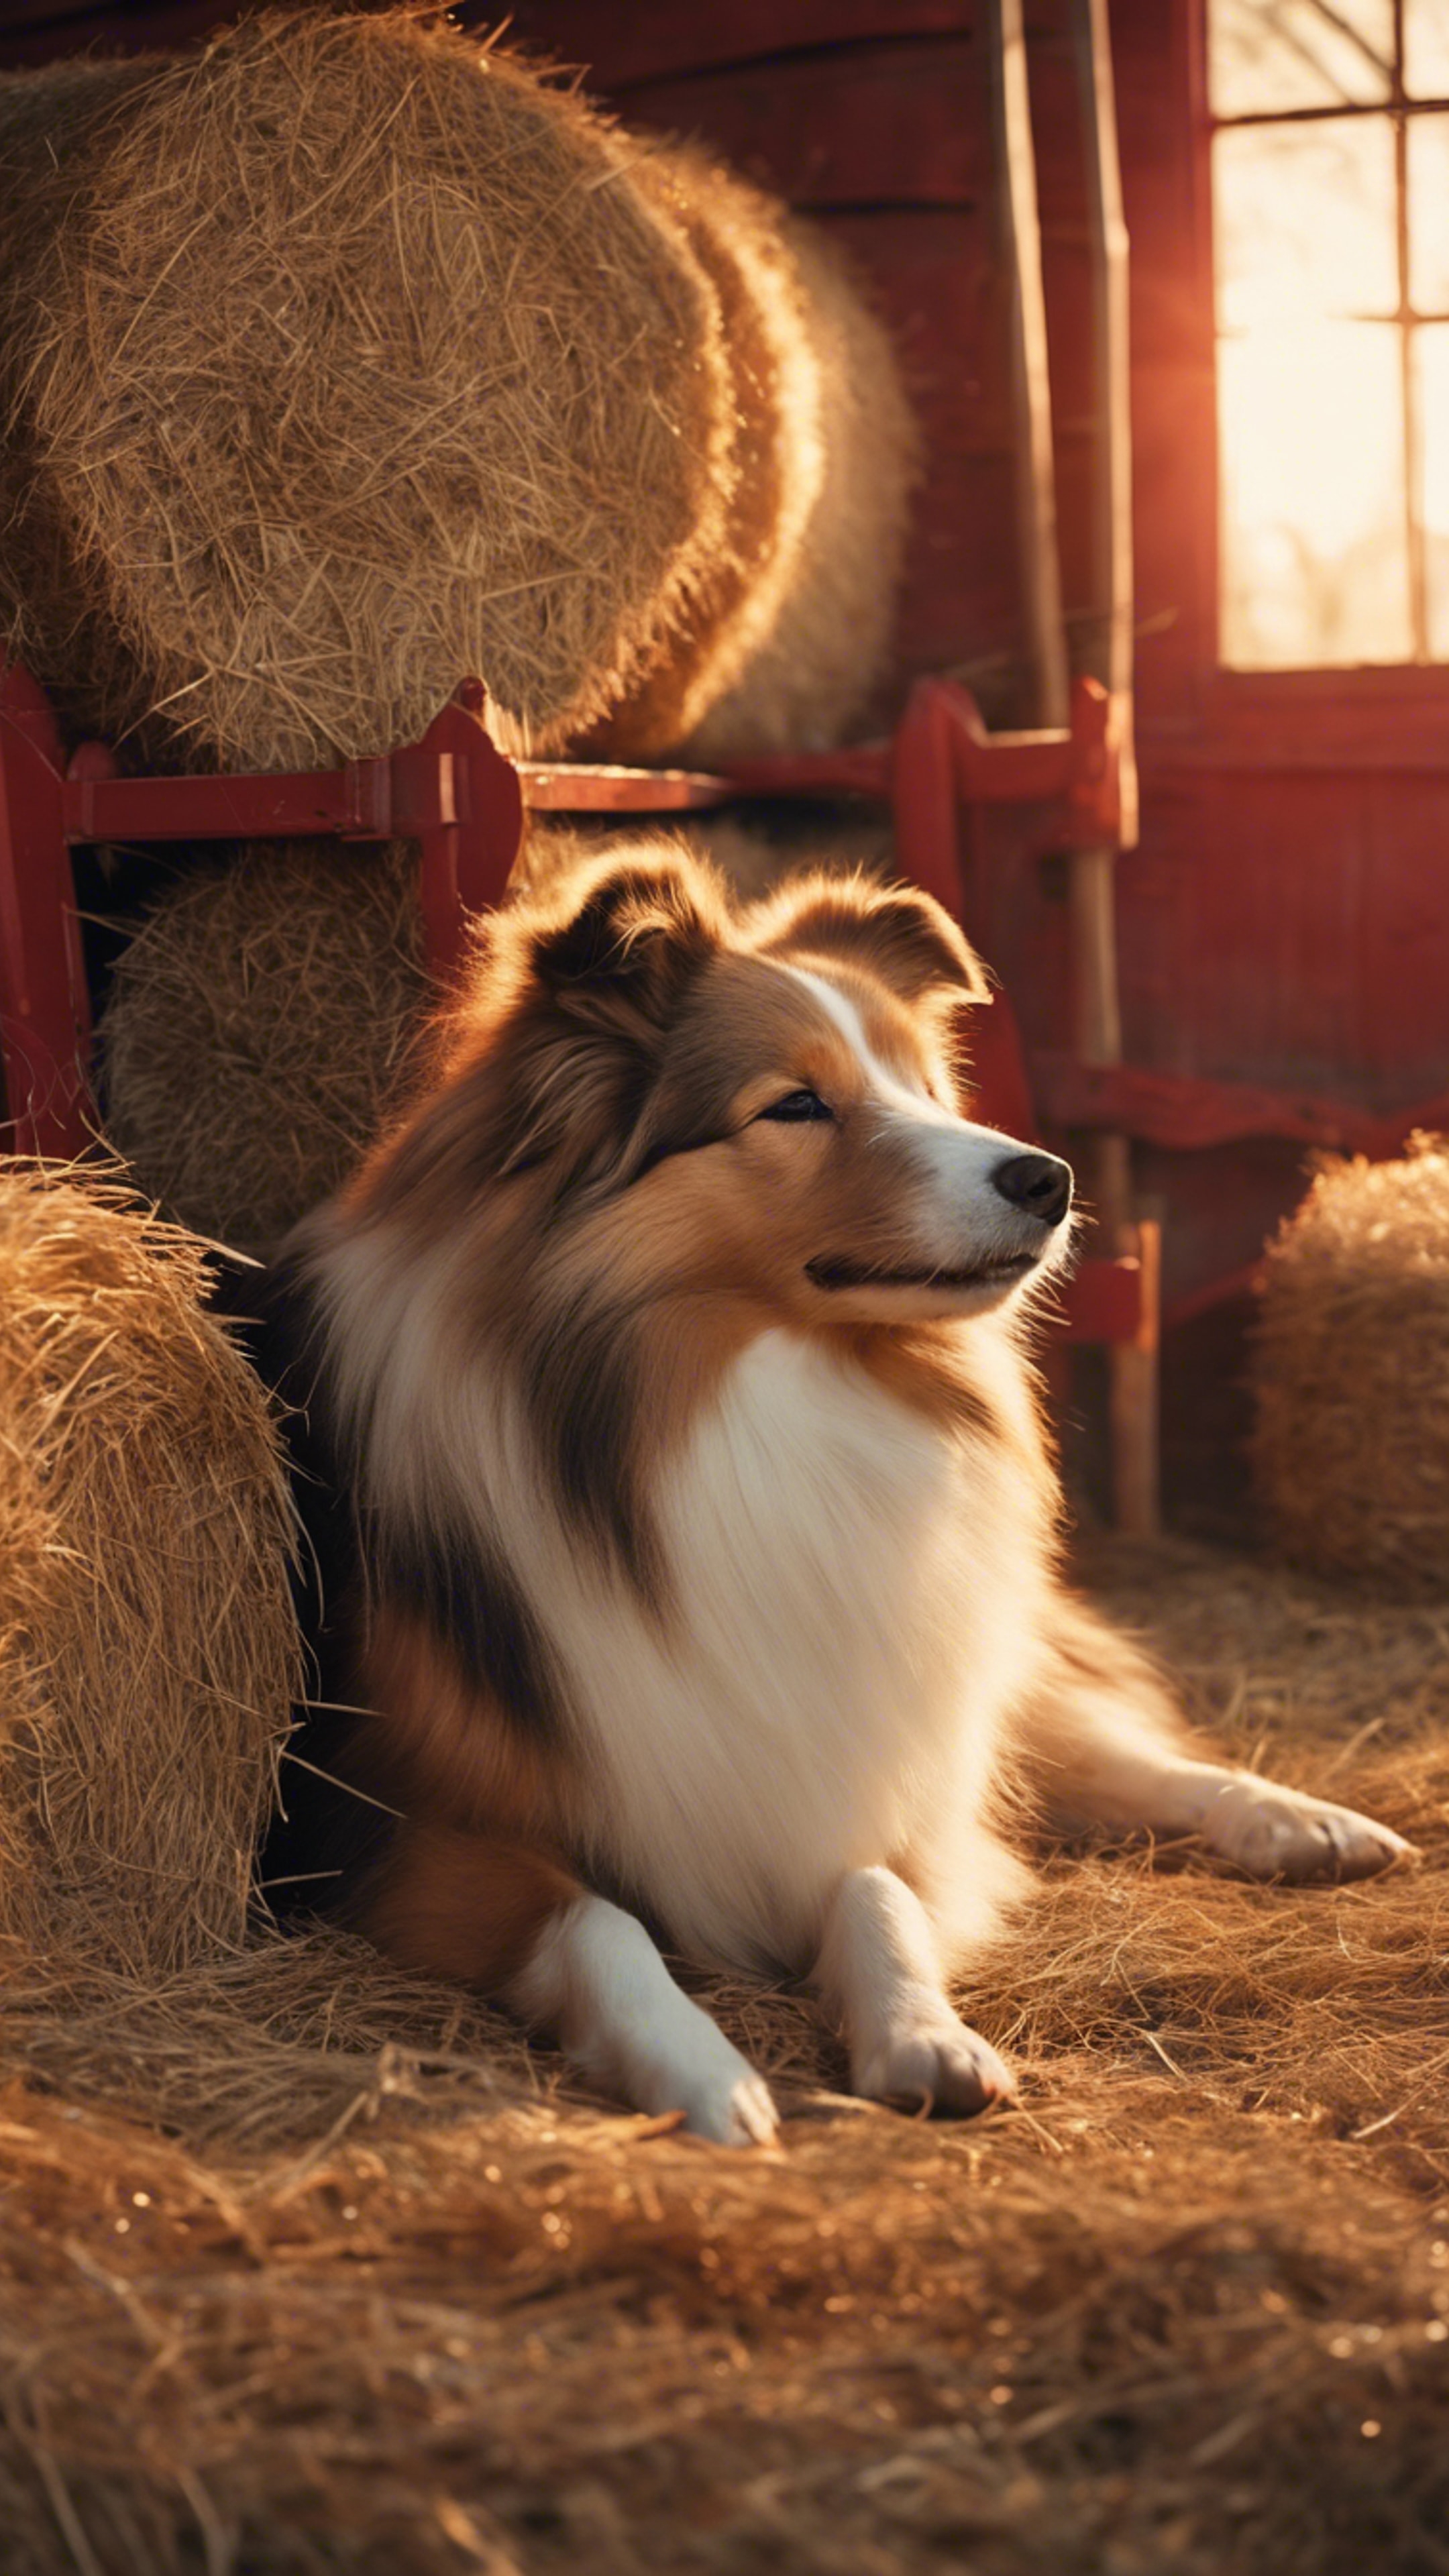 A Shetland Sheepdog sleeping in a vintage red barn, surrounded by hay balls and a setting sun. טפט[4b8e09167f2043c5830e]